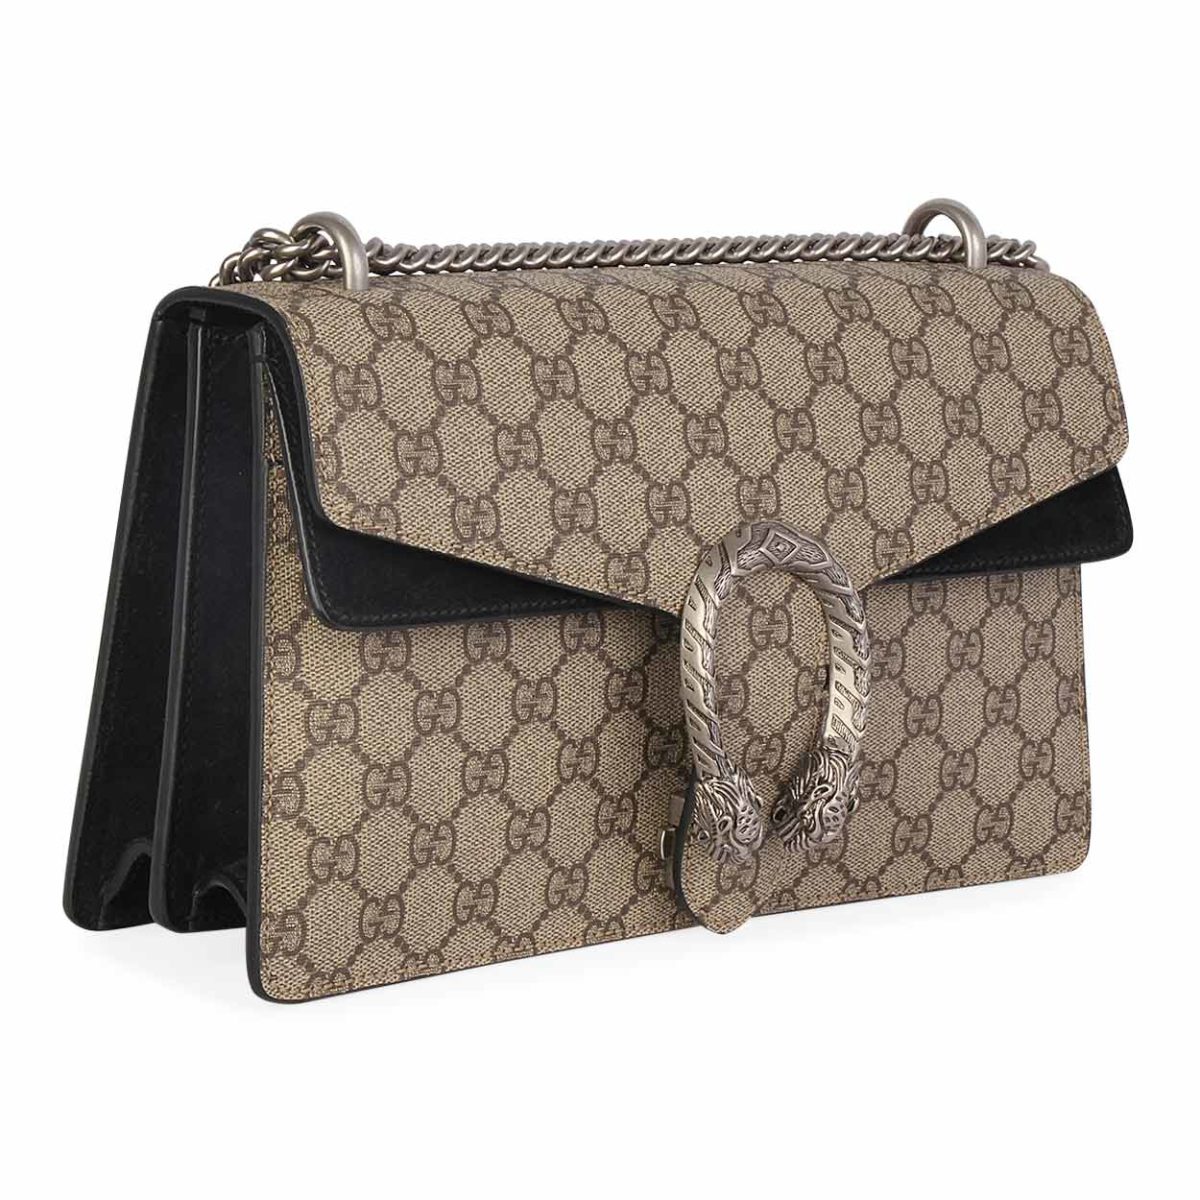 GUCCI GG Supreme Dionysus Small Shoulder Bag Beige | Luxity